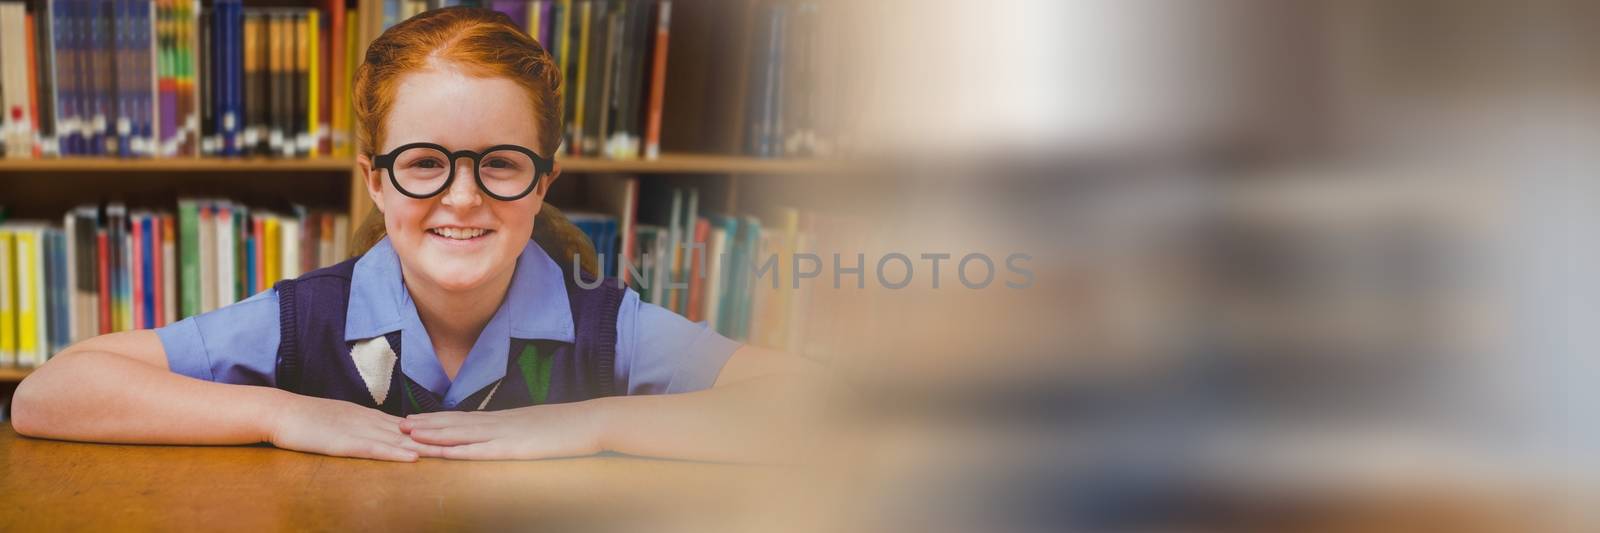 School girl in education library with transition by Wavebreakmedia